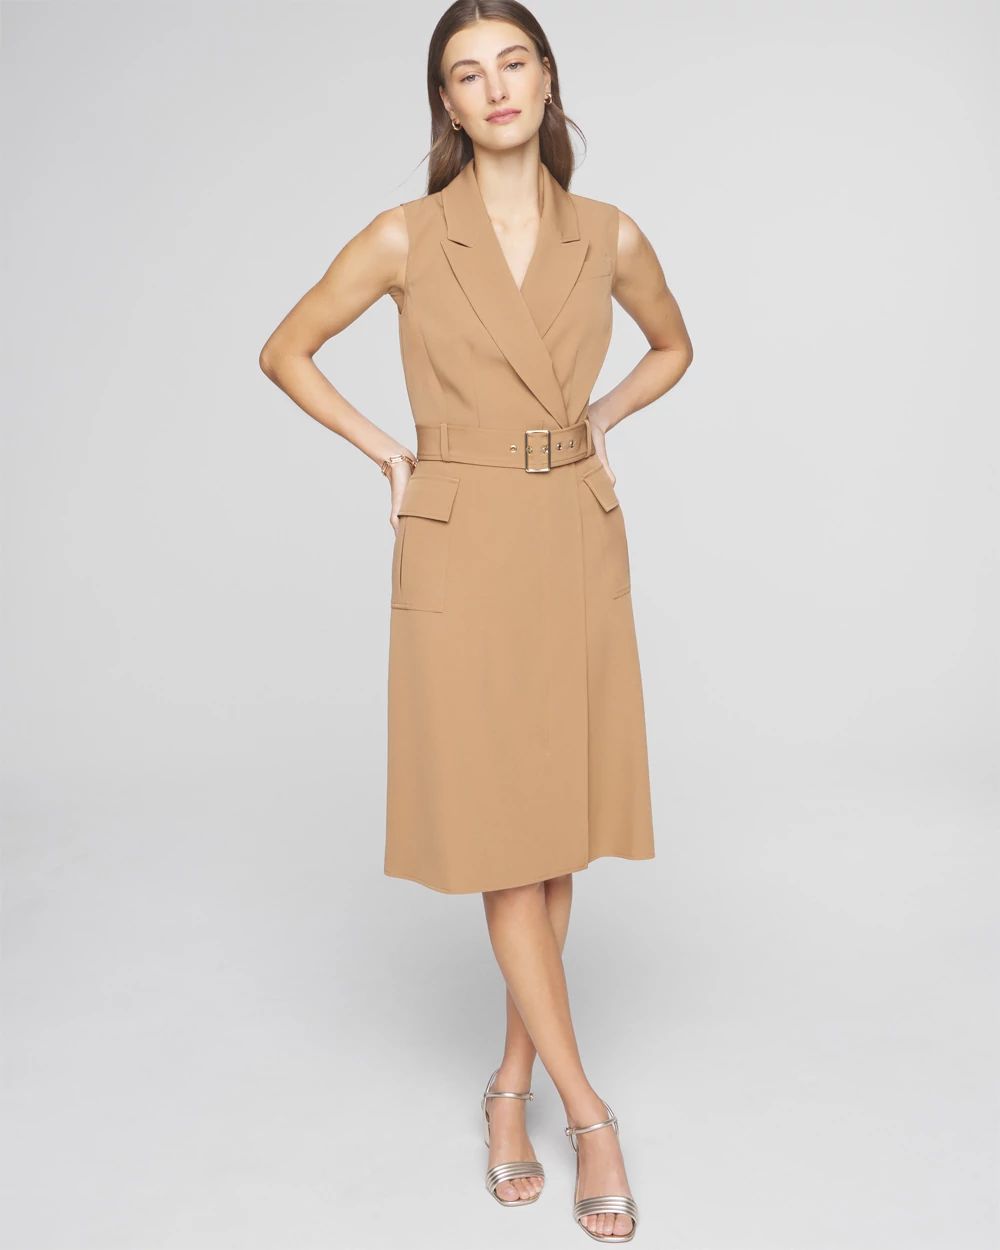 Sleeveless Belted Blazer Dress click to view larger image.